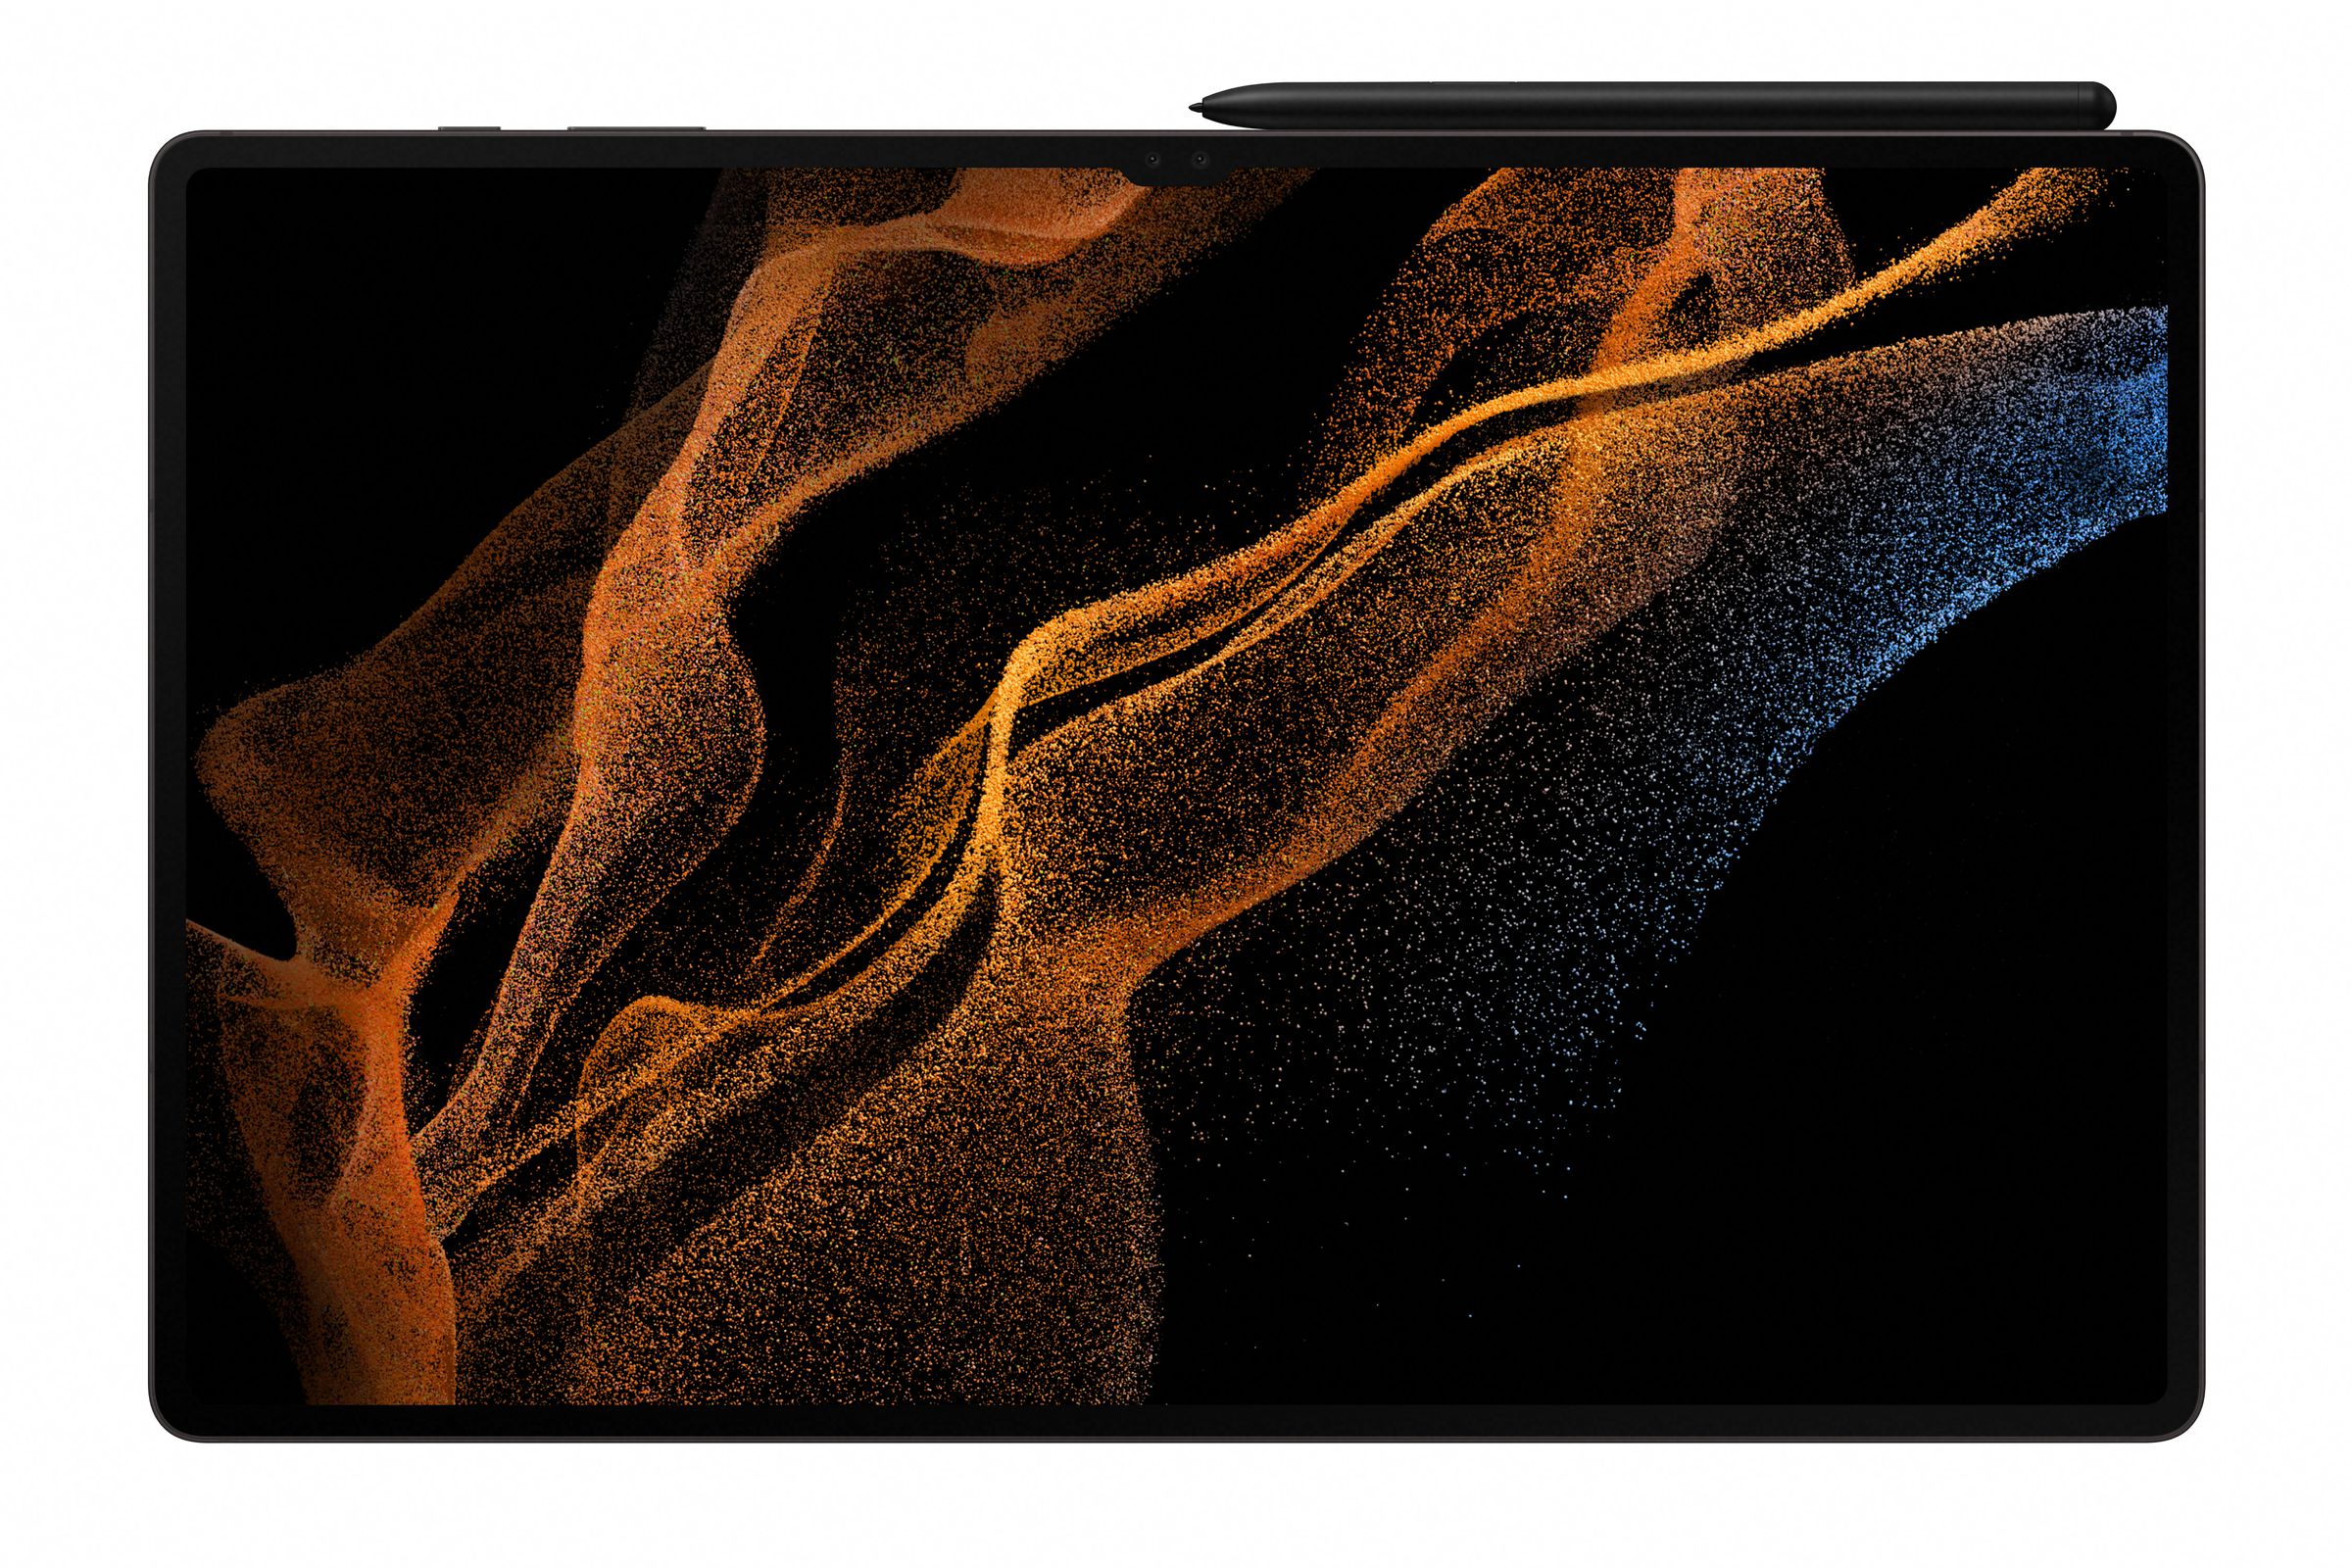 Look close at the top of that dark wallpaper on the Tab S8 Ultra and you notice the notch cutout trying its best to blend in.